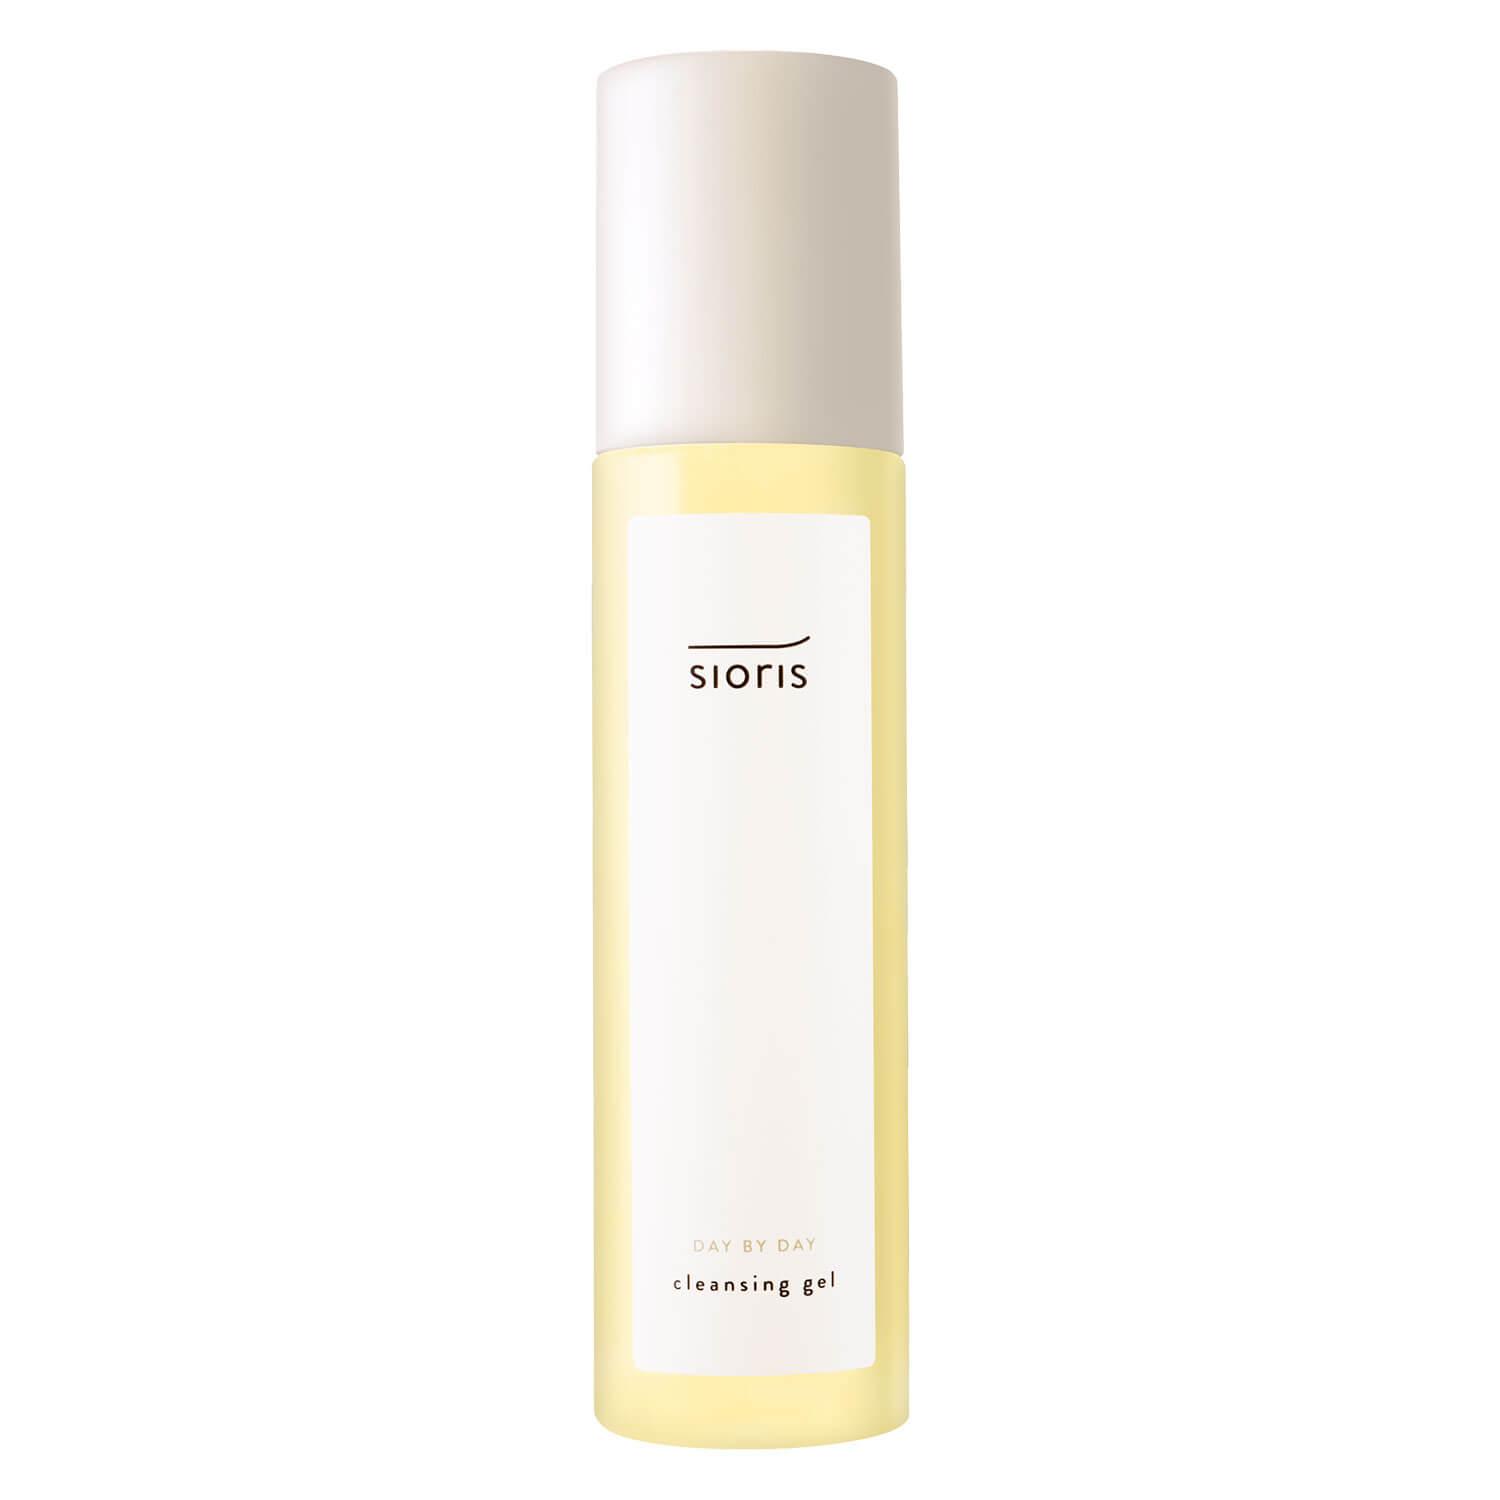 sioris - DAY BY DAY cleansing gel